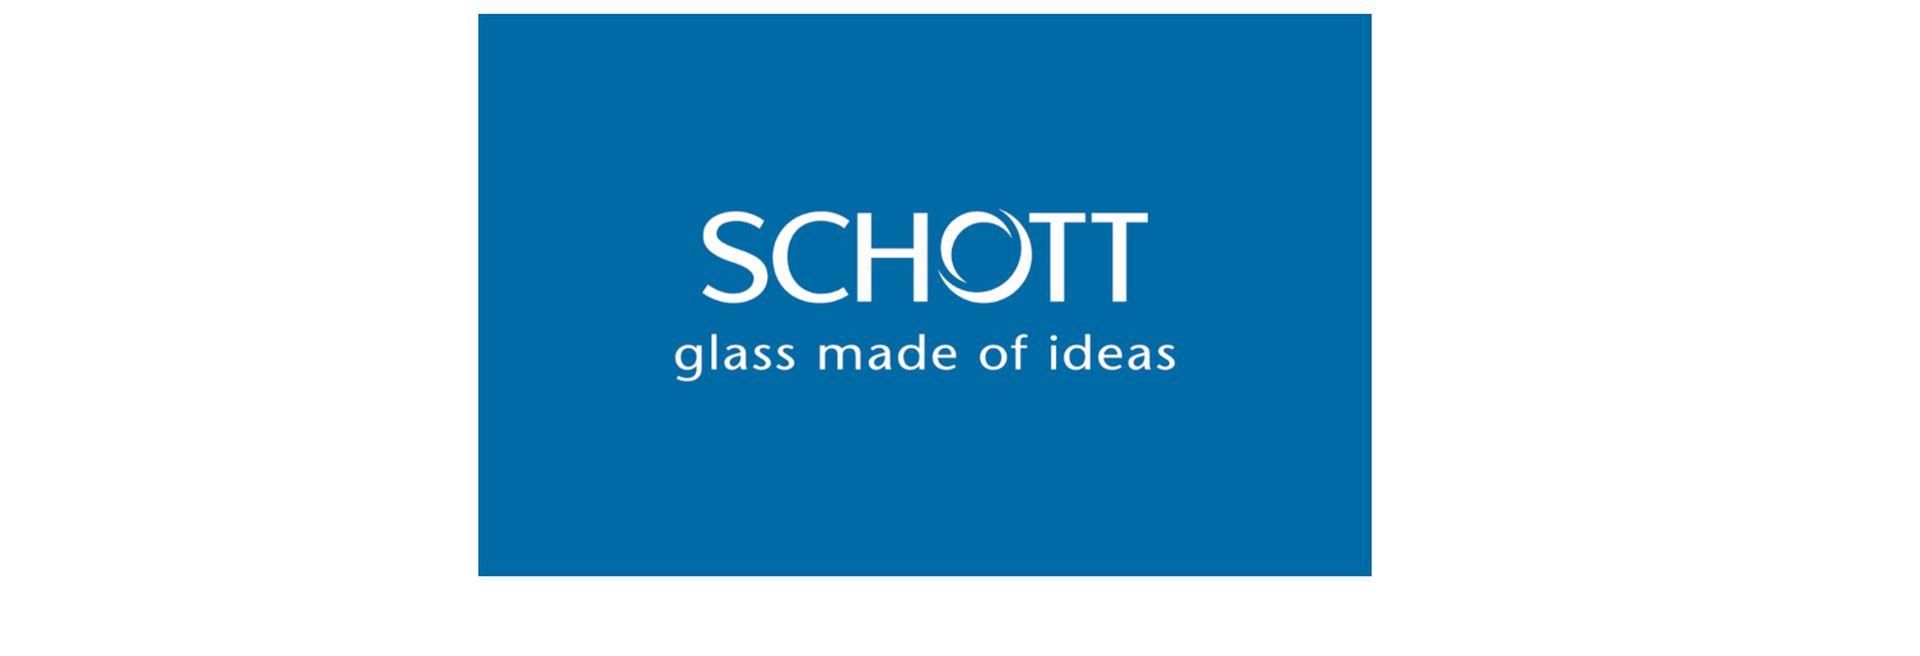 Yet Another High-Tech Investment to Expand SCHOTT Manufacturing Capacity